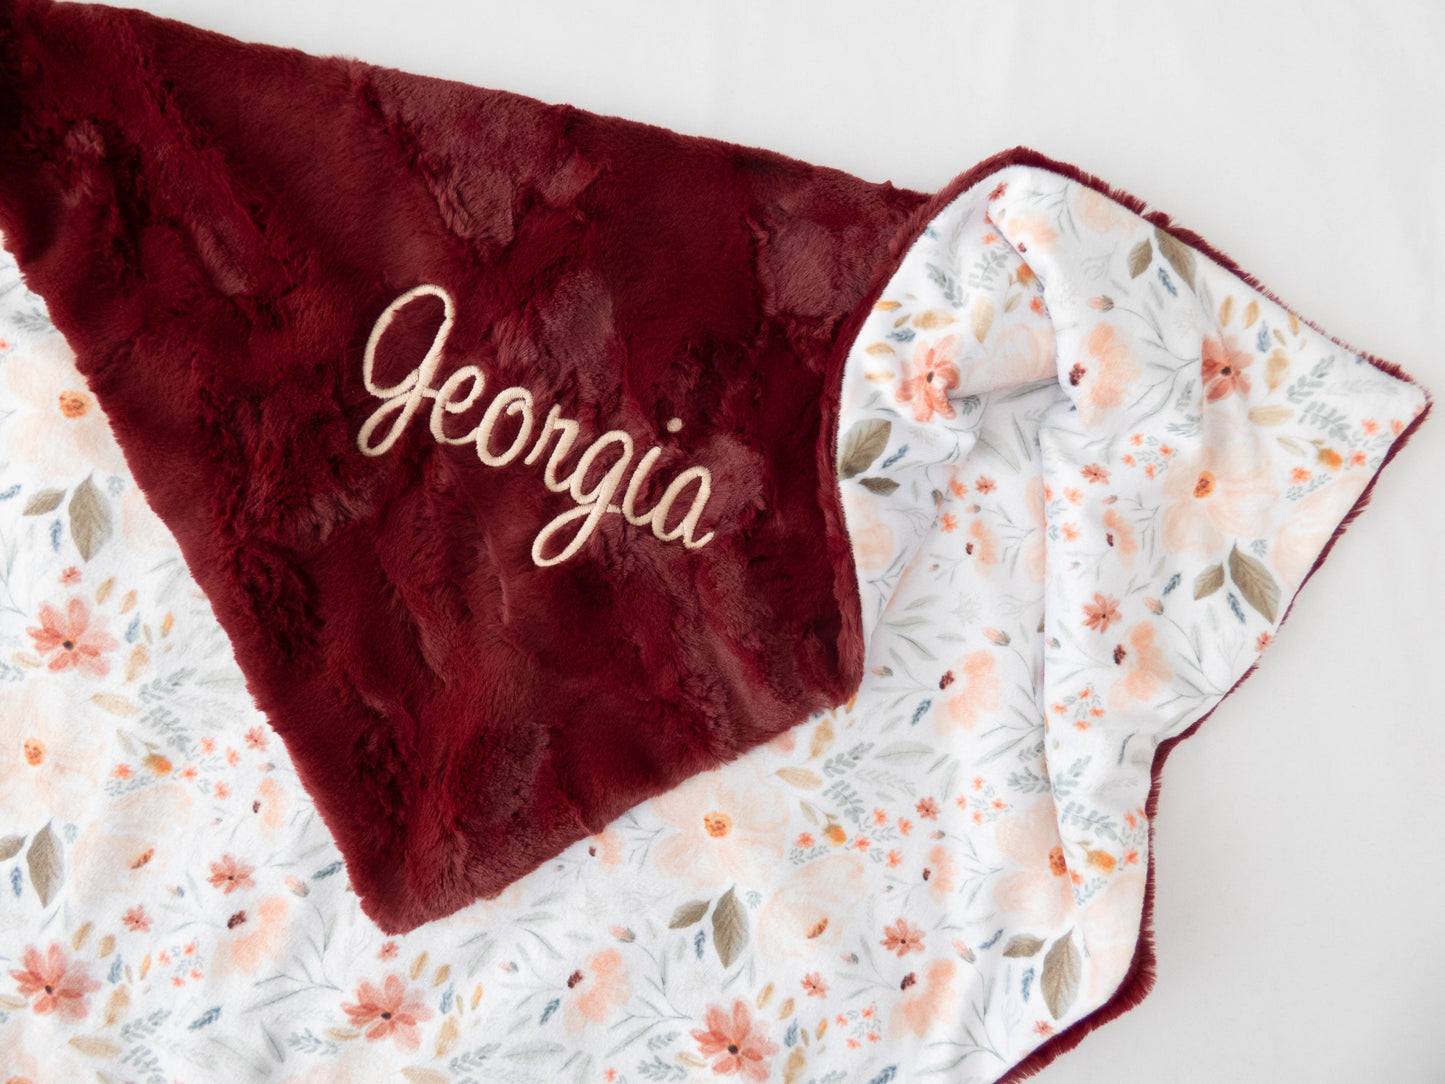 Valencia Gardens Floral Personalized Baby Blanket